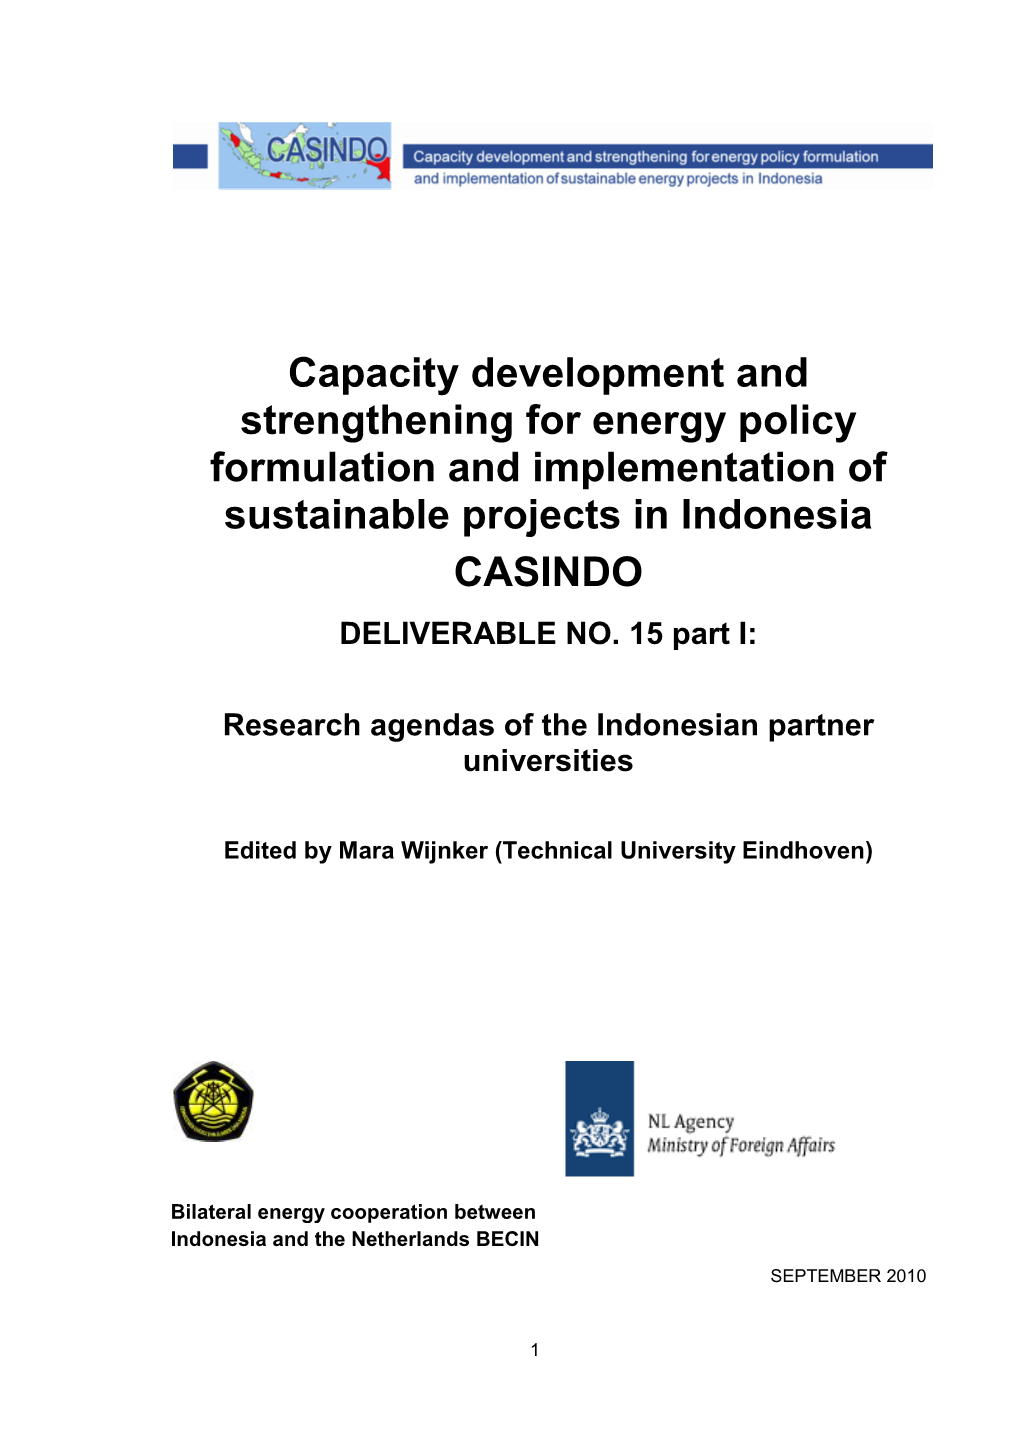 Capacity Development and Strengthening for Energy Policy Formulation and Implementation of Sustainable Projects in Indonesia CASINDO DELIVERABLE NO